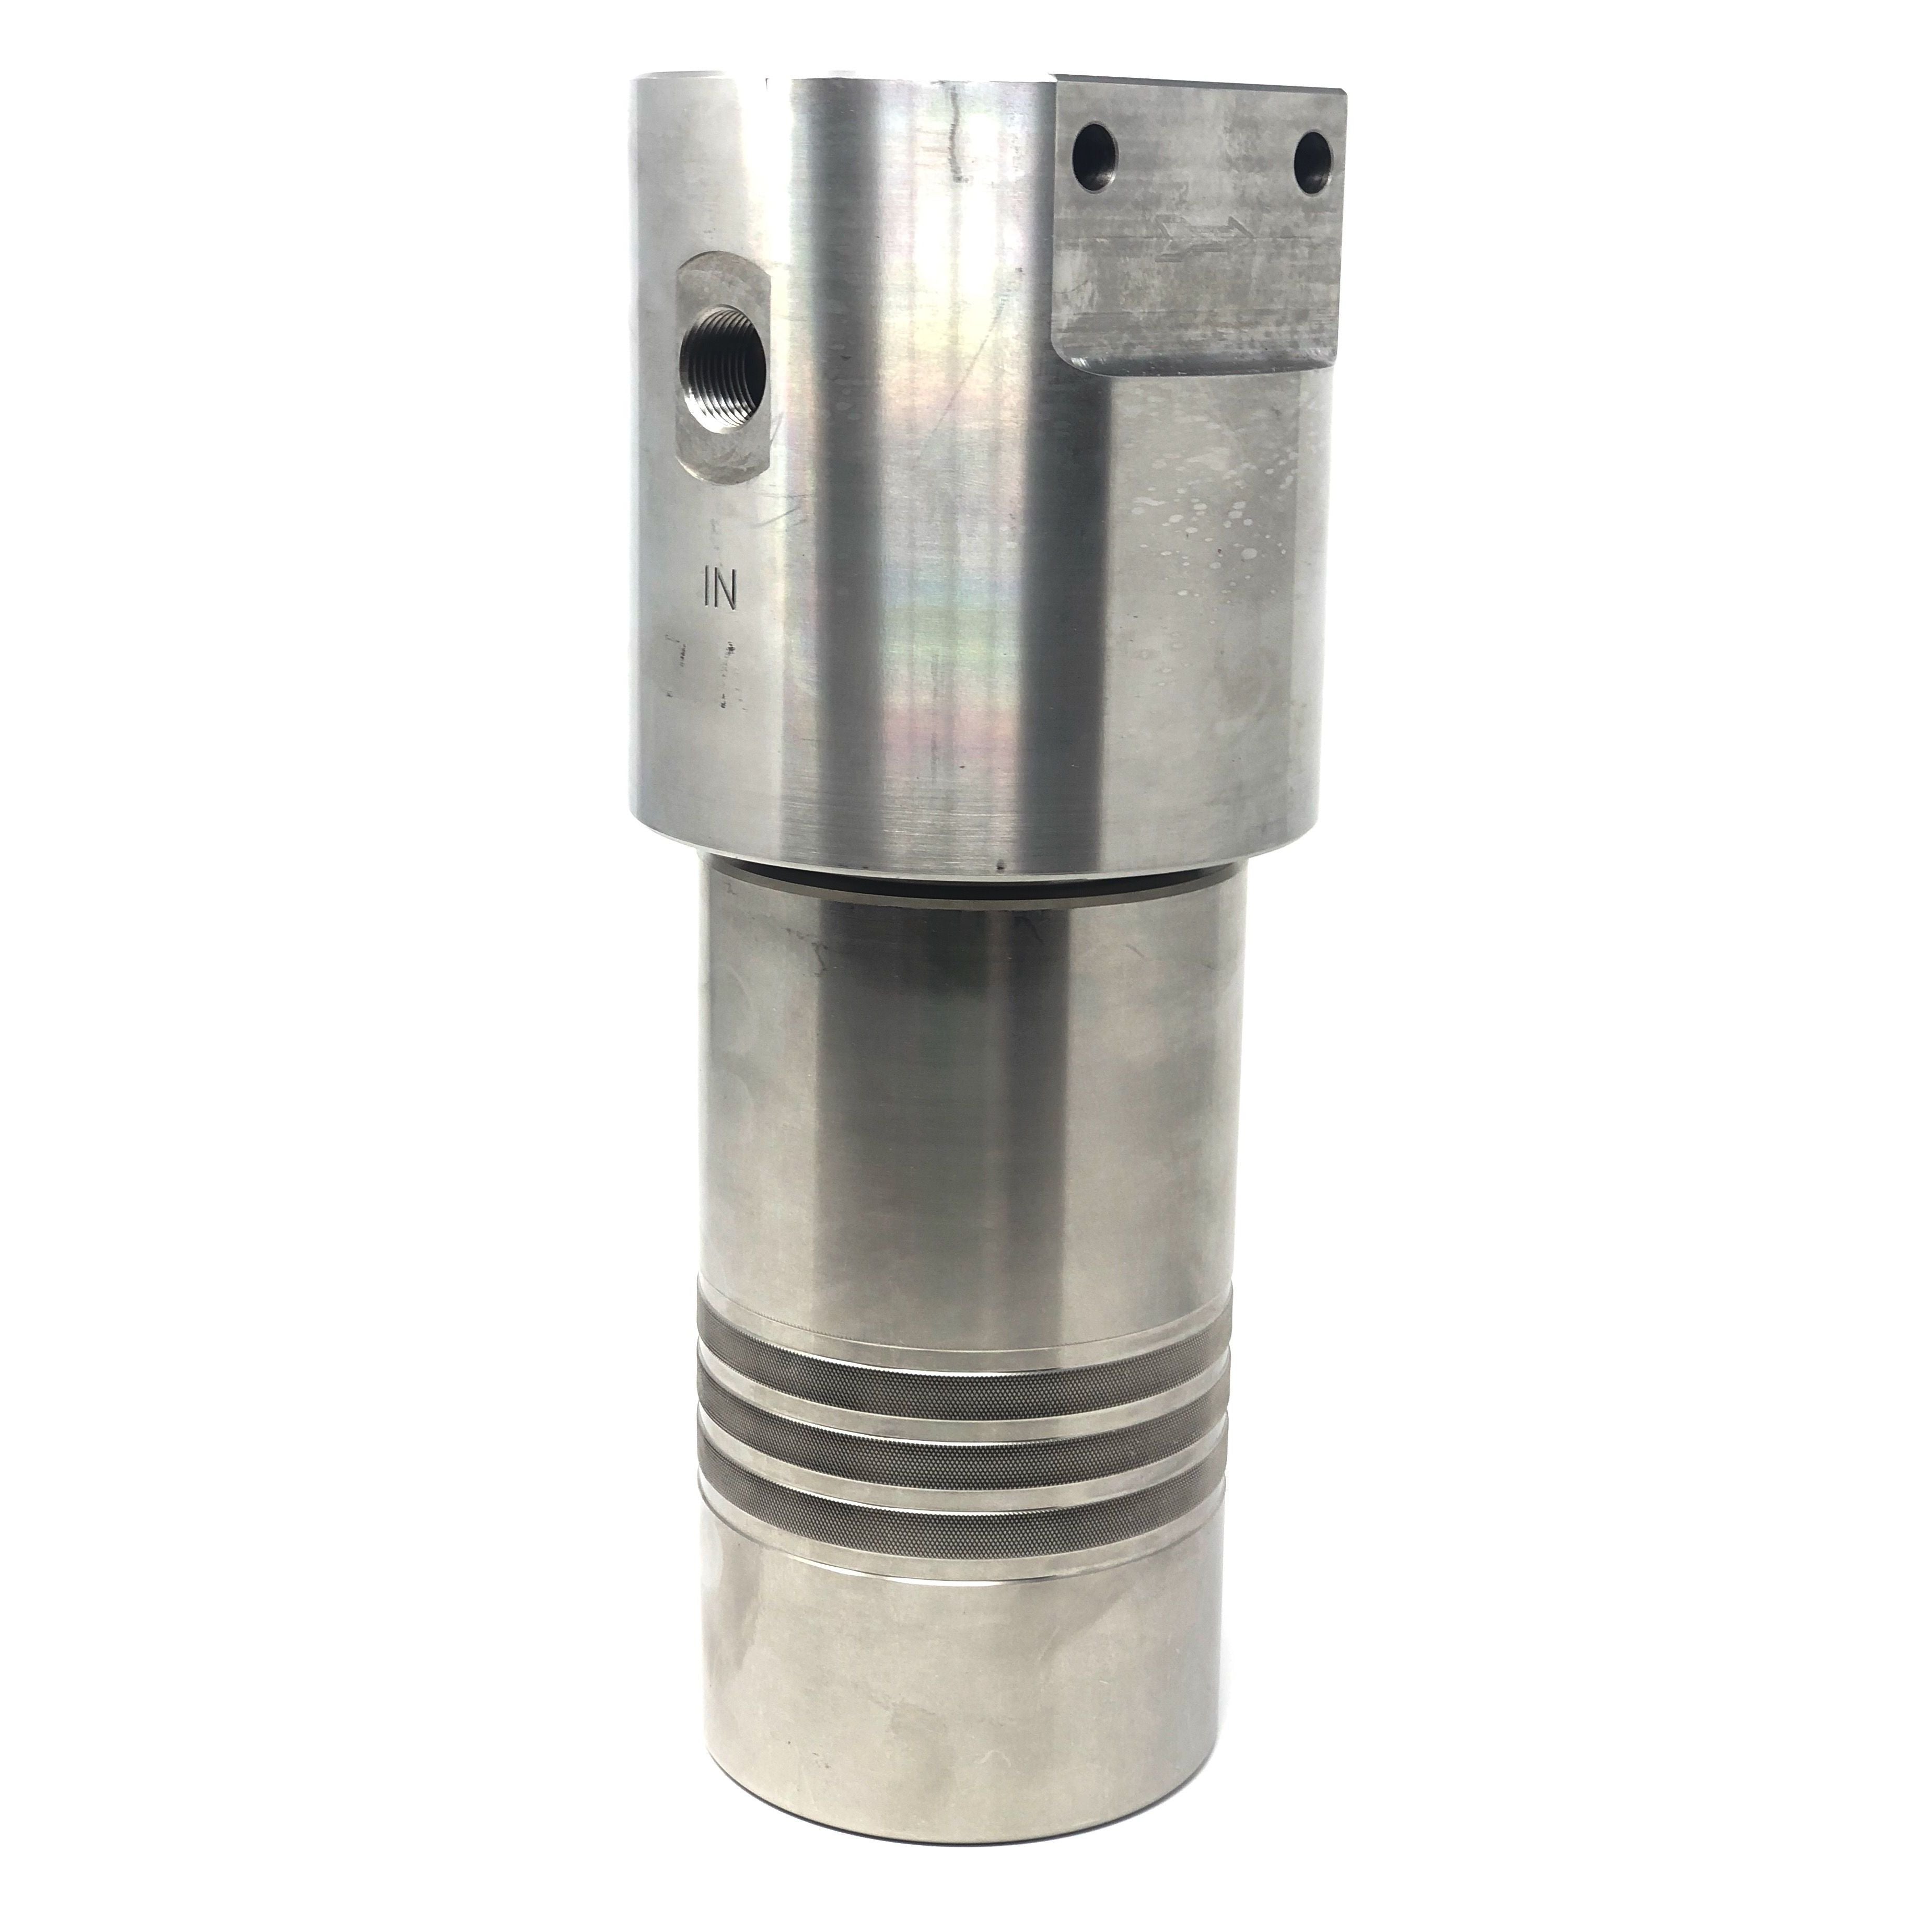 52S-244S-18SEN : Chase Ultra High Pressure Inline Filter, 10000psi, #4 SAE (1/4"), 18 Micron, With Visual Indicator, No Bypass